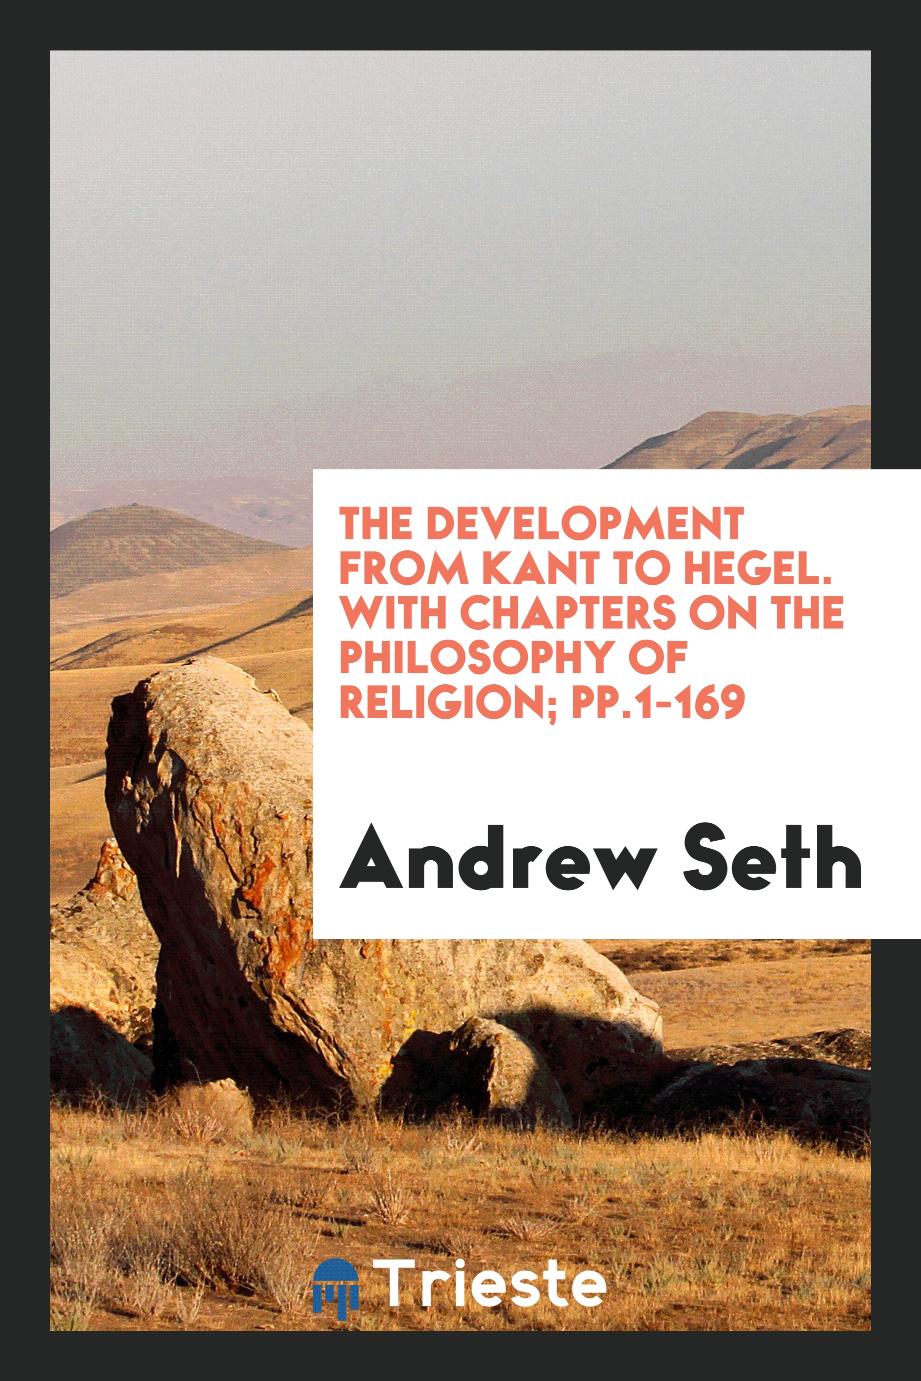 The Development from Kant to Hegel. With Chapters on the Philosophy of Religion; pp.1-169